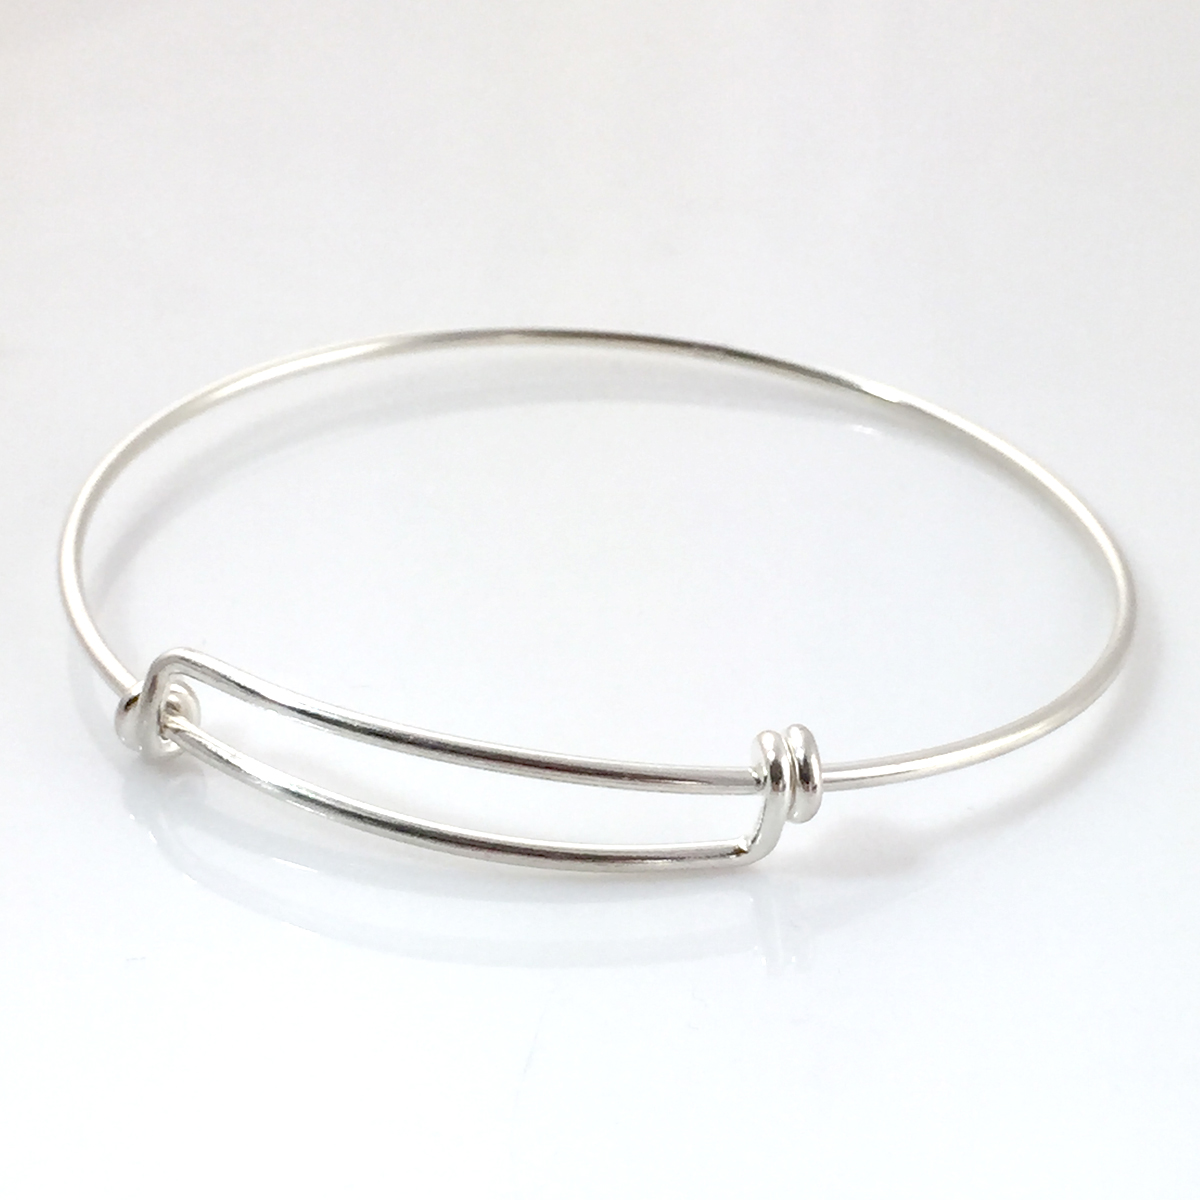 Empty sterling silver bangle